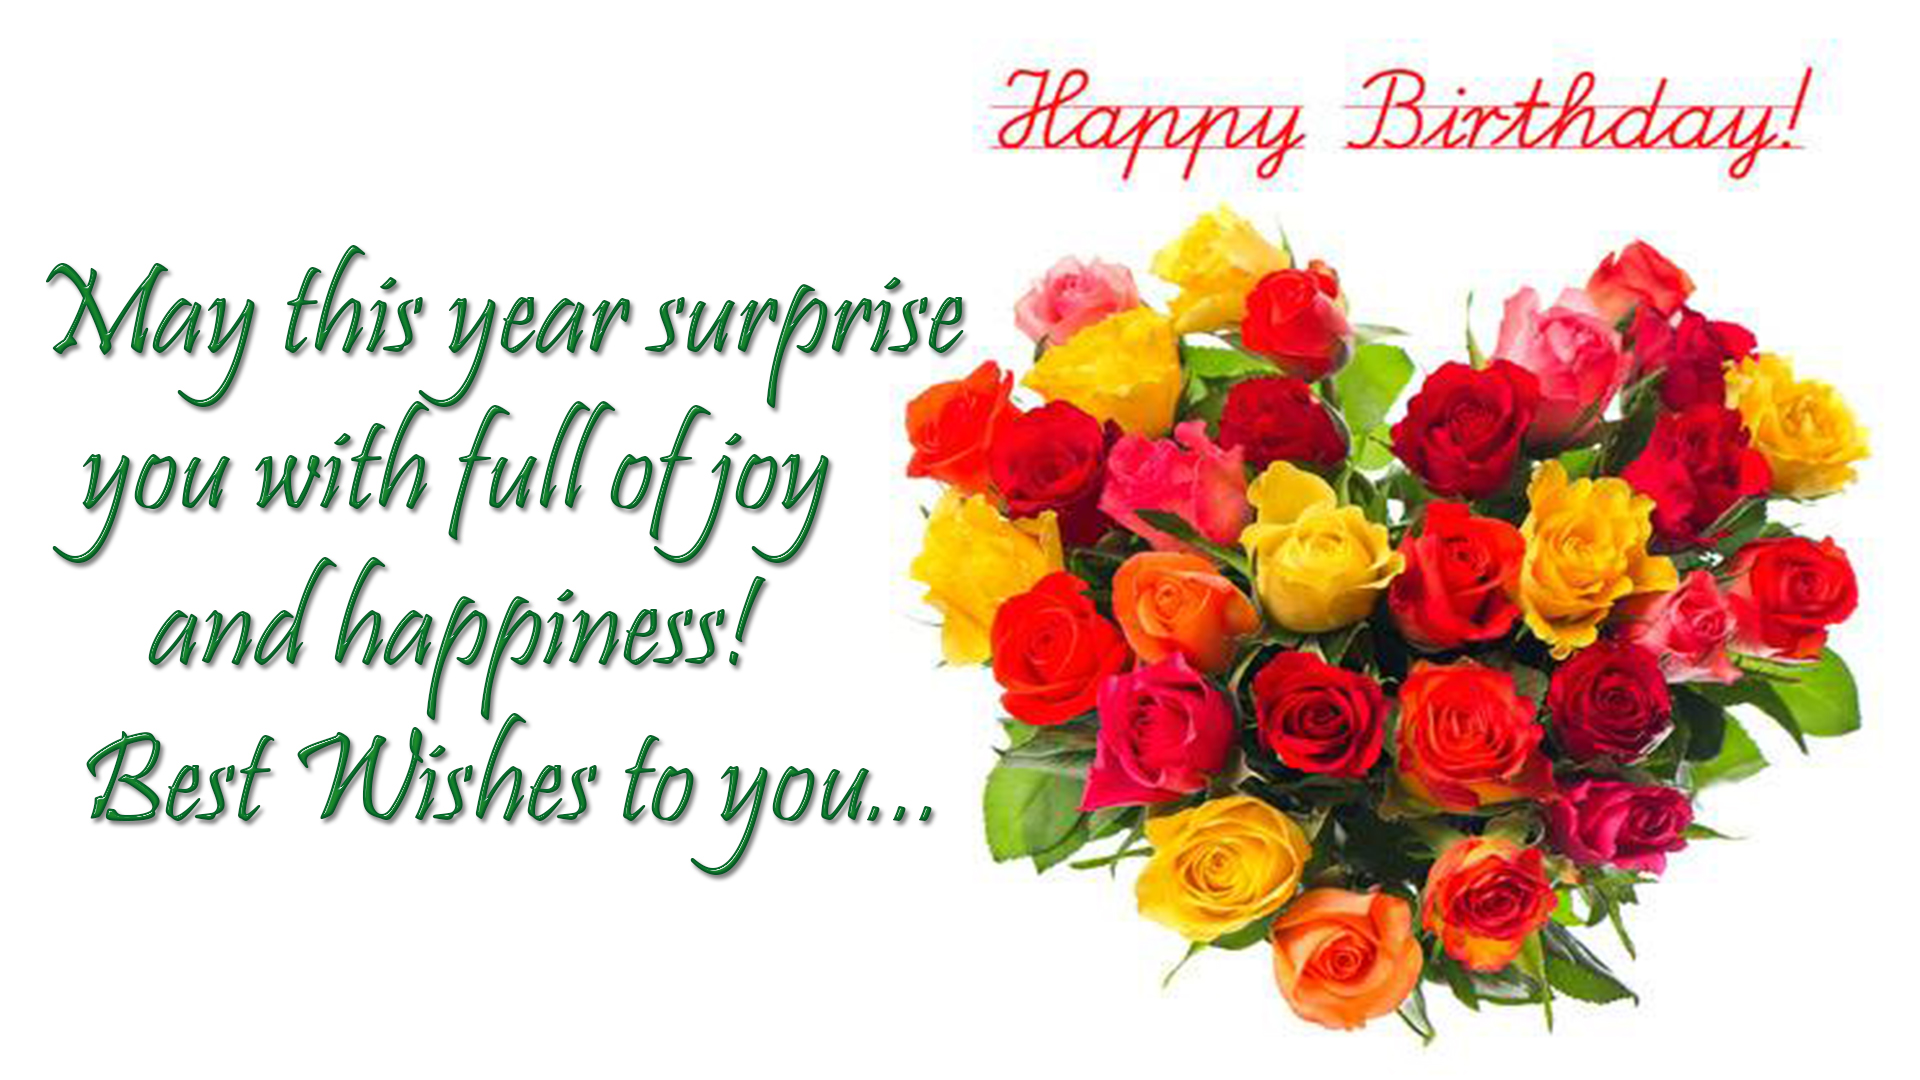 Happy Birthday Wishes Images | Latest Birthday Greeting Cards